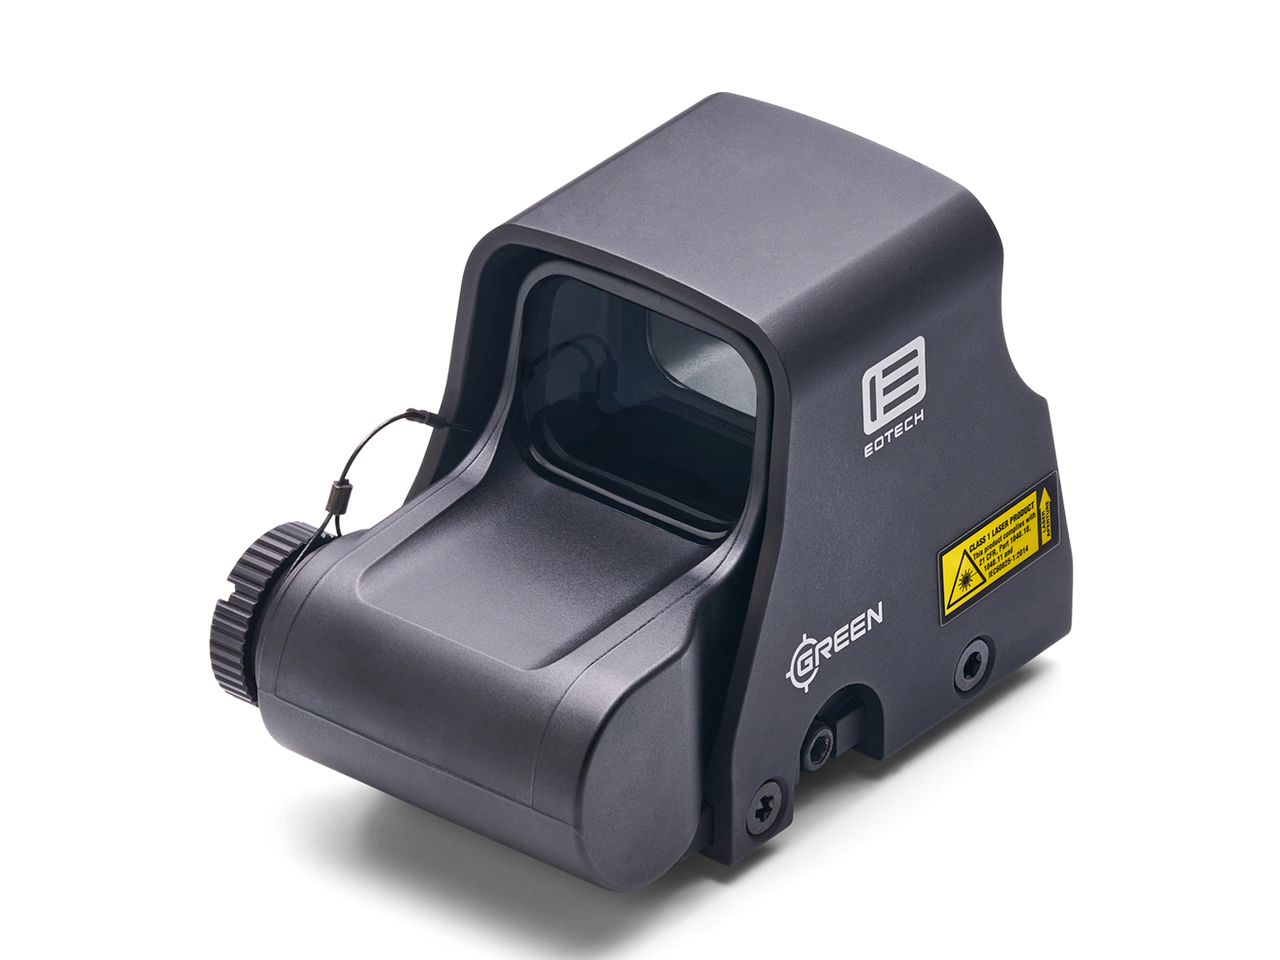 EOTech XPS2-0 Holographic Weapon Sight, Single CR123 battery, 68 MOA ring & 1 MOA dot Black, XPS2-0GREY Grey,  XPS2-0GRN Green, XPS2-0ODGRN Olive Drab Green